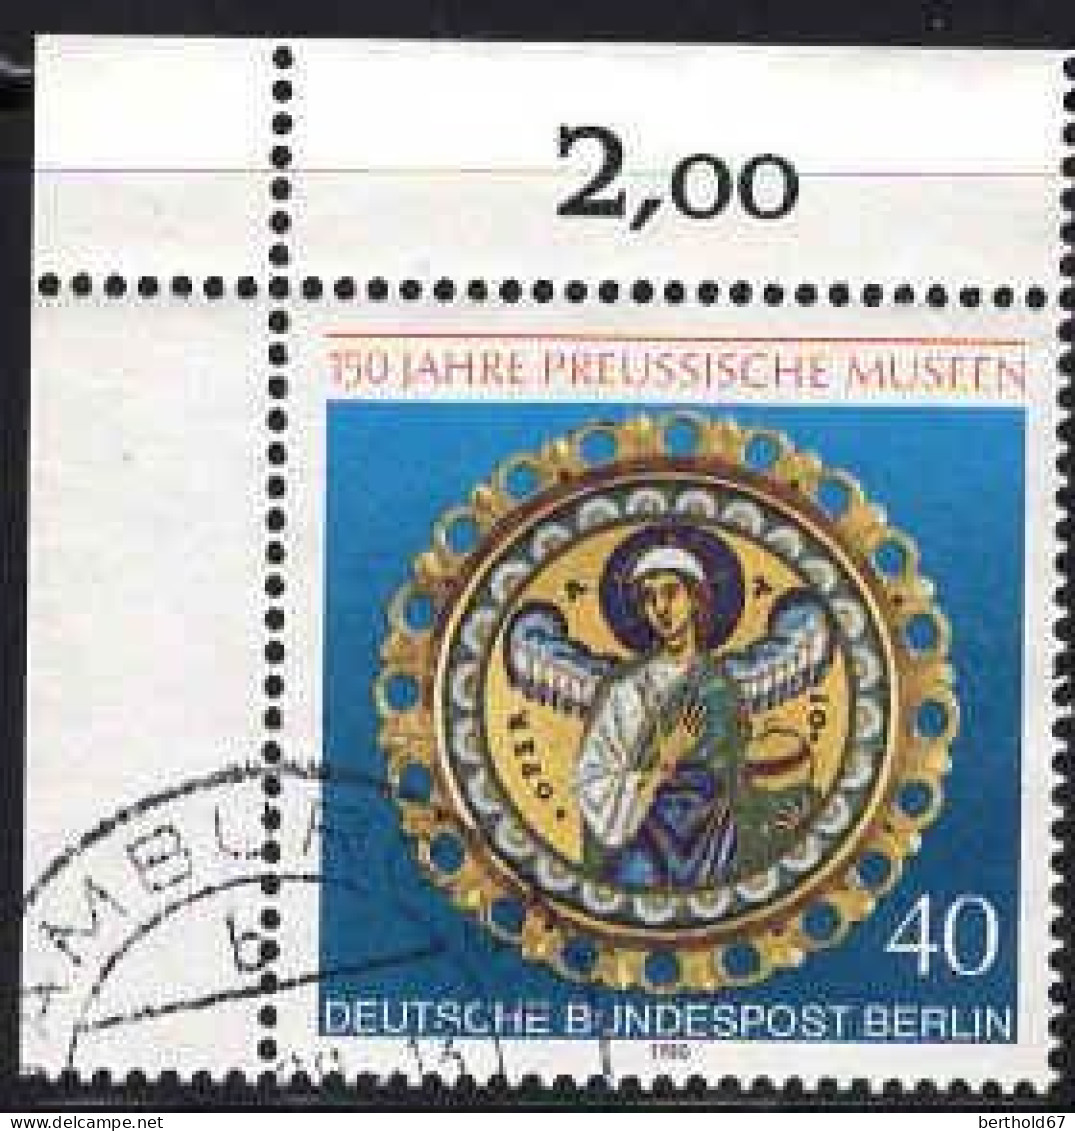 Berlin Poste Obl Yv:586 Mi:625 Orfèvrerie Medaillon Coin De Feuille (TB Cachet Rond) - Used Stamps